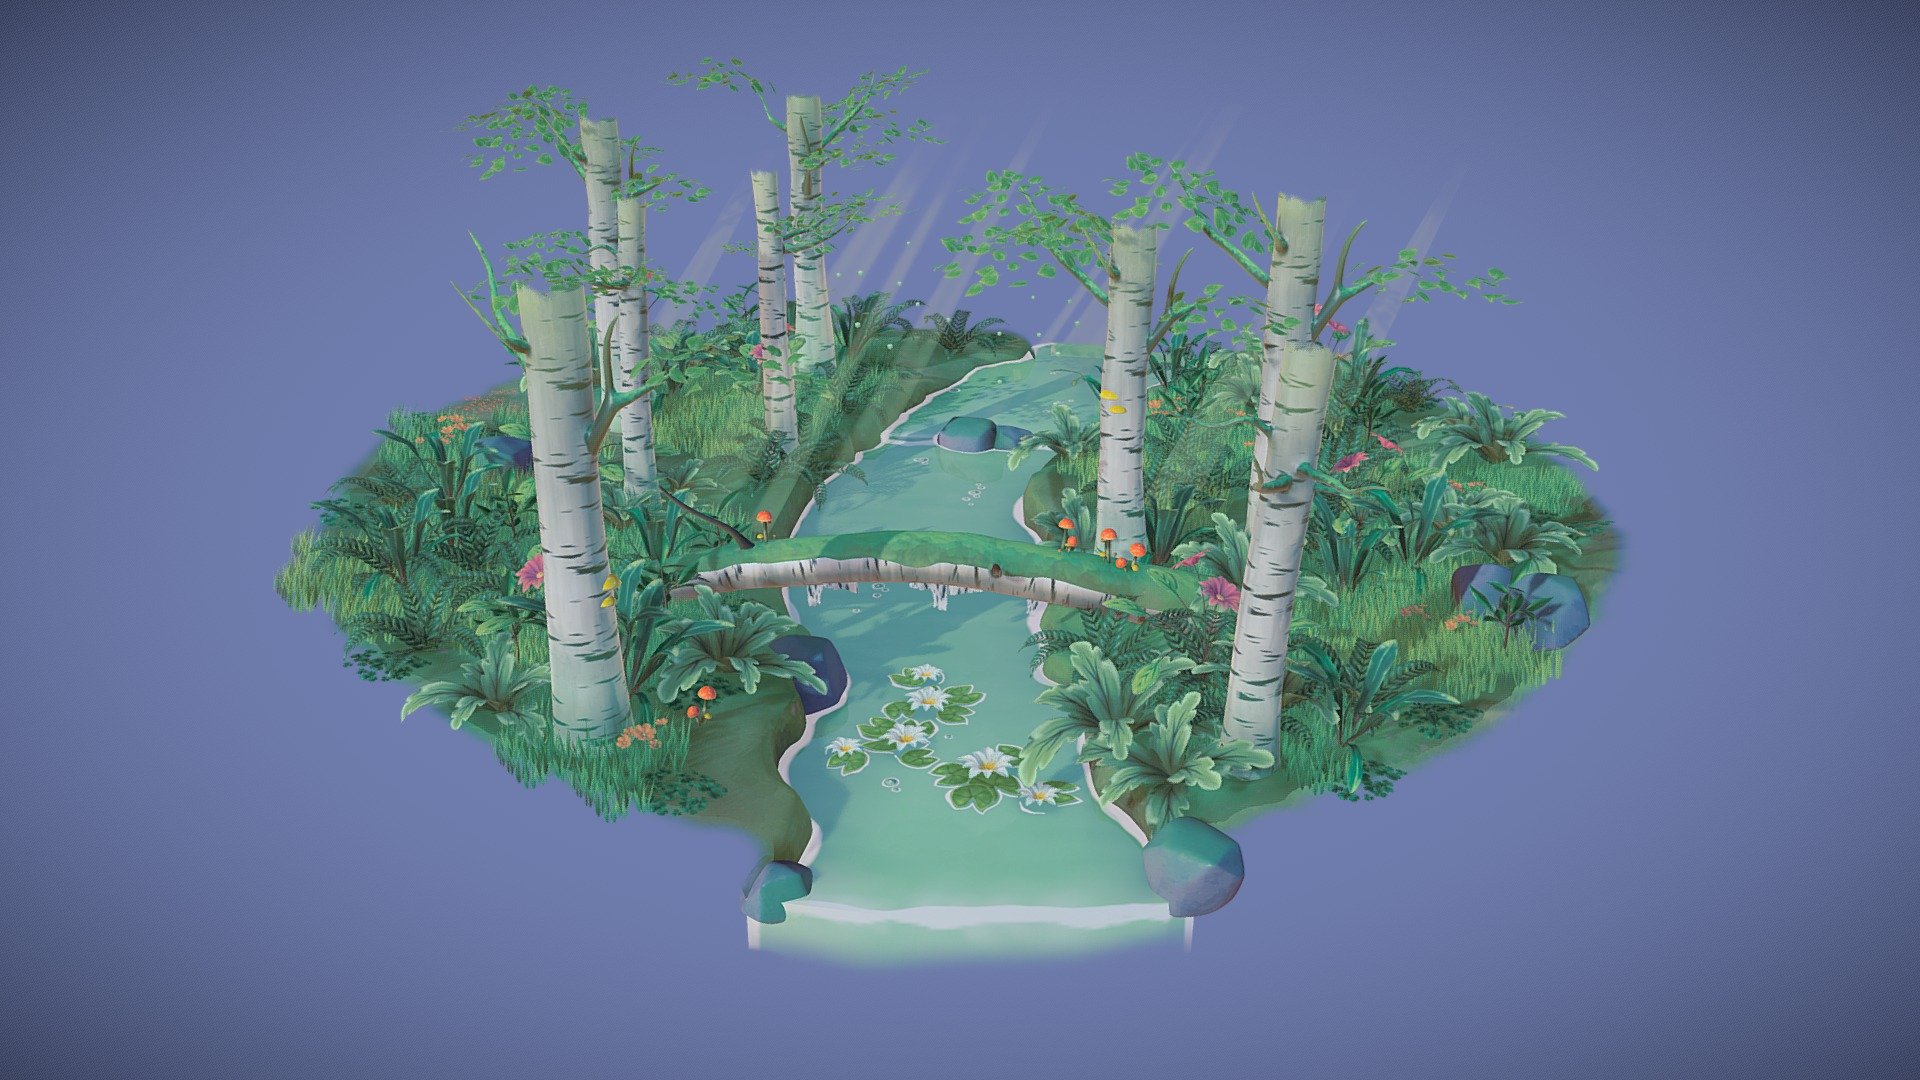 This project started to create hand painted foliage and it turned into a forest! I was inspired by the color palettes used in Ghibli concepts 3d model